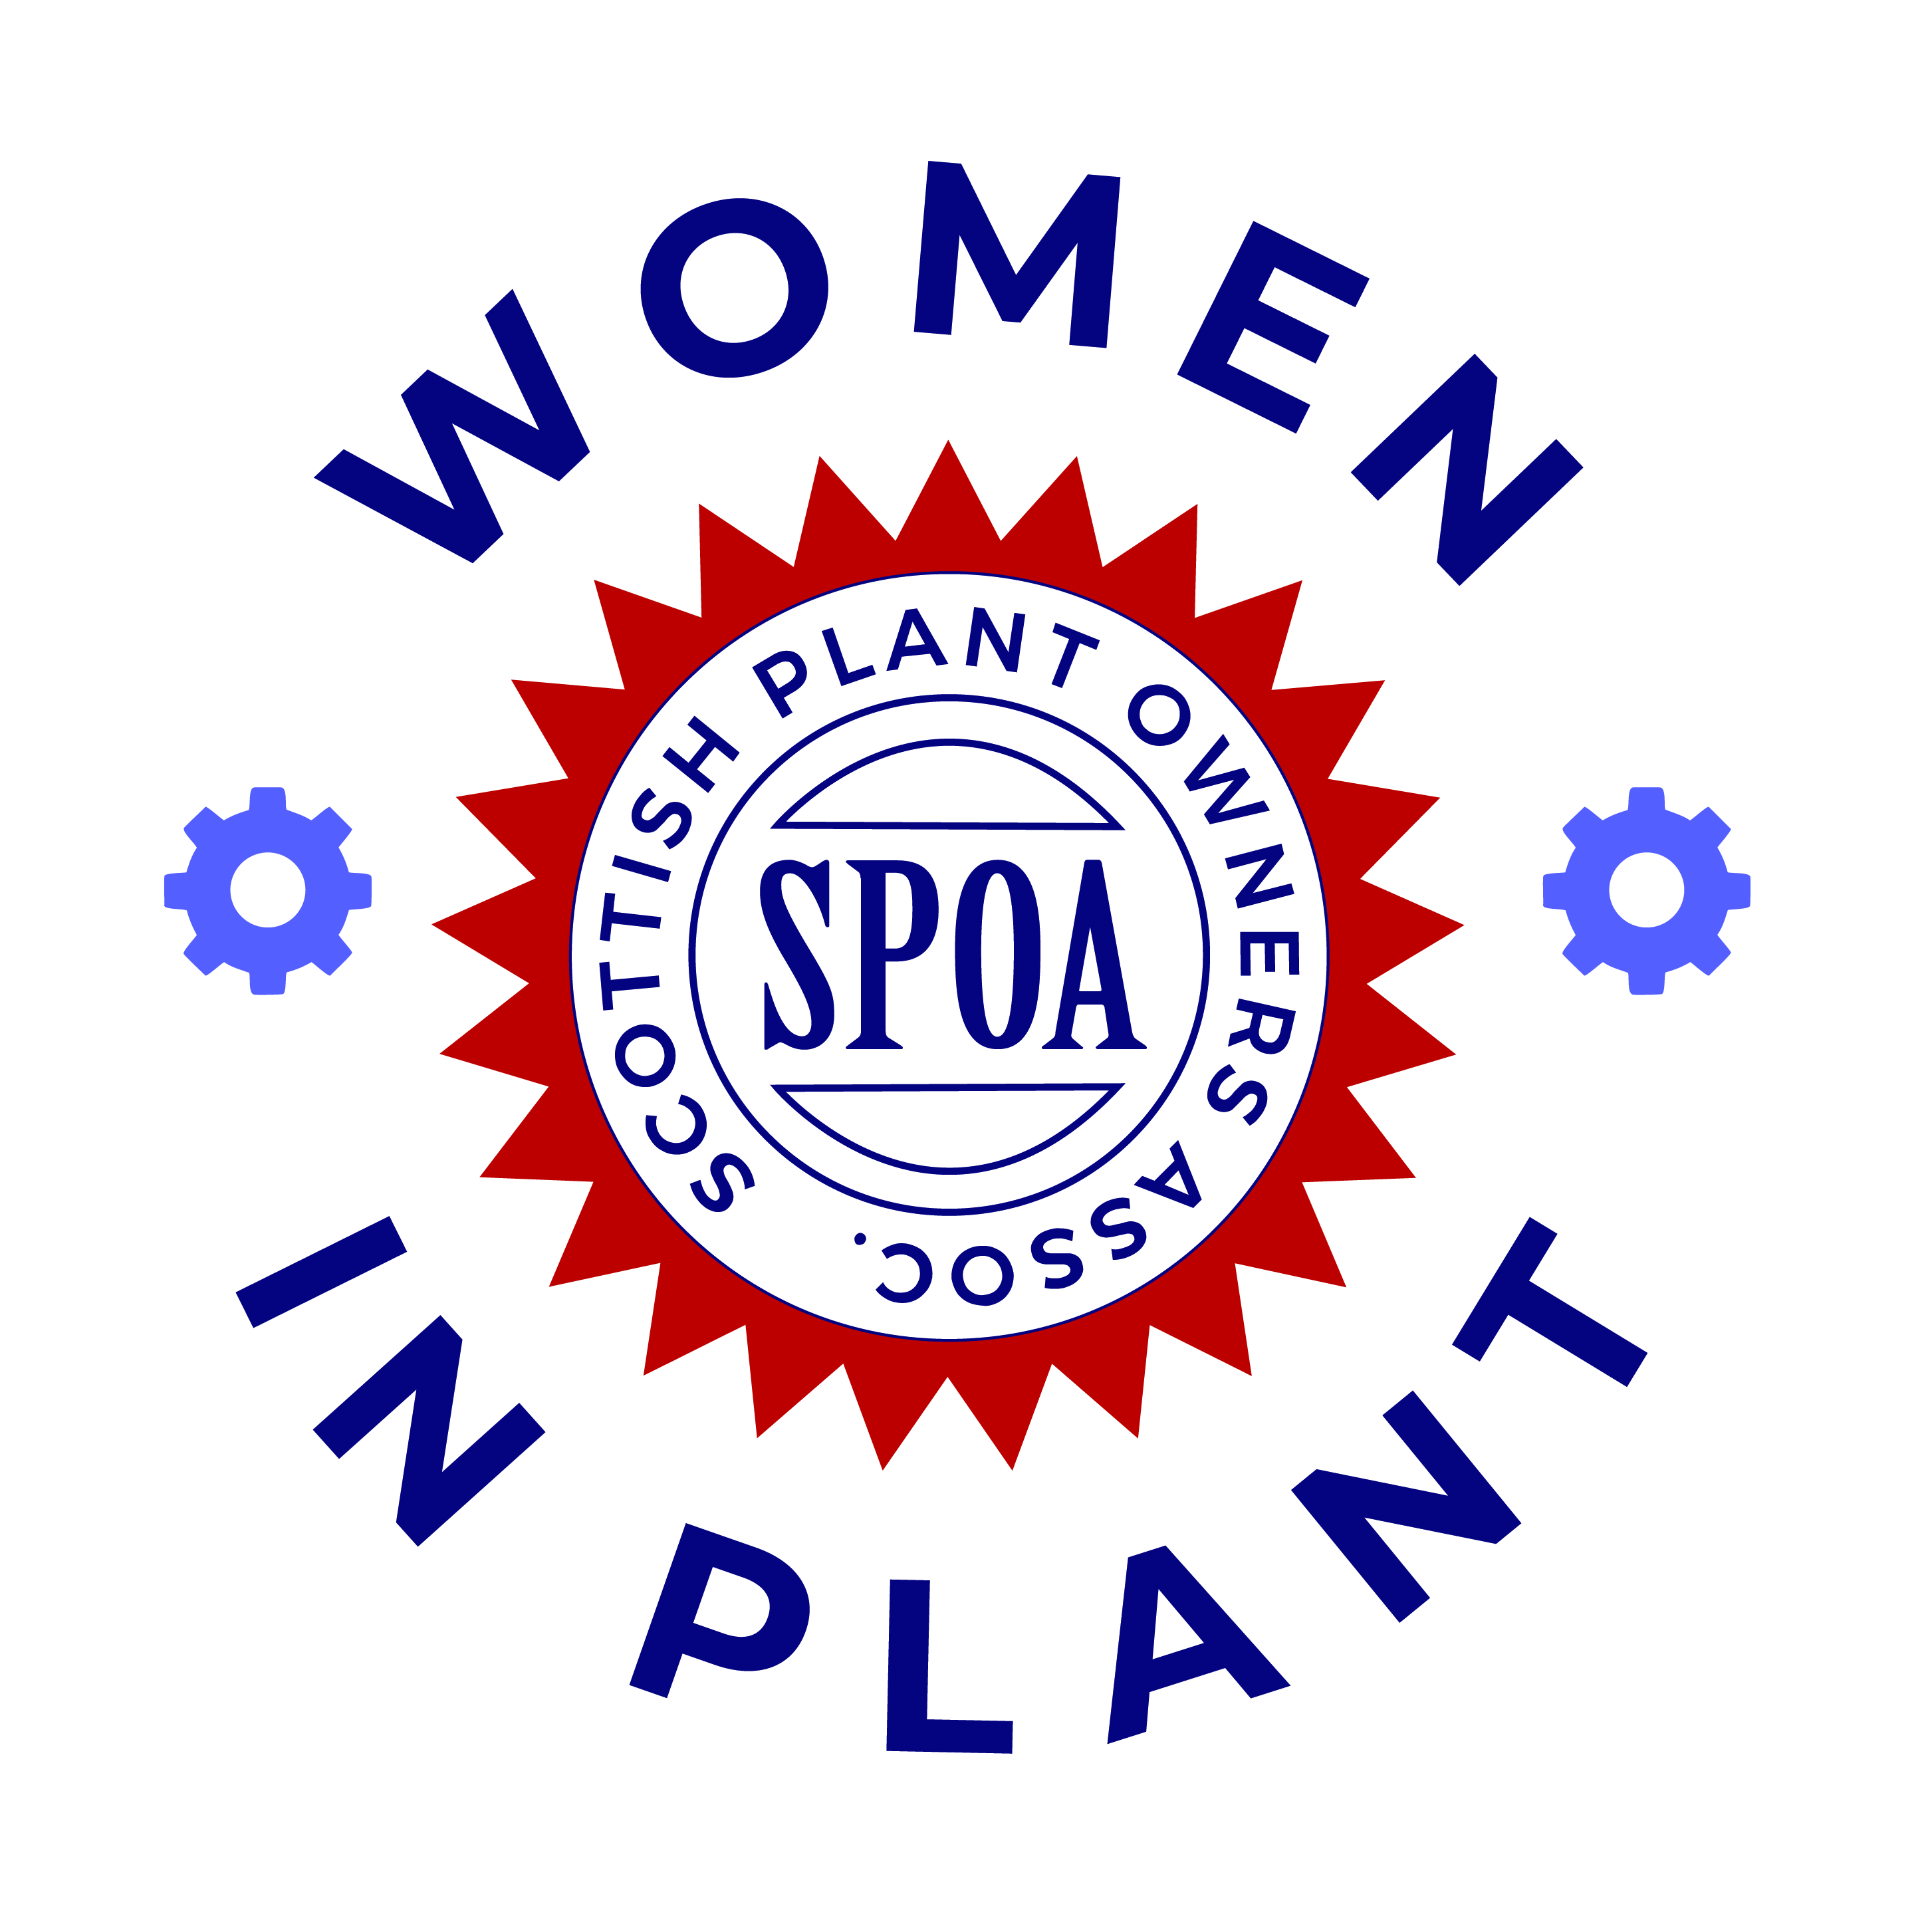 Women in Plant working group established at Scottish Plant Owners Association